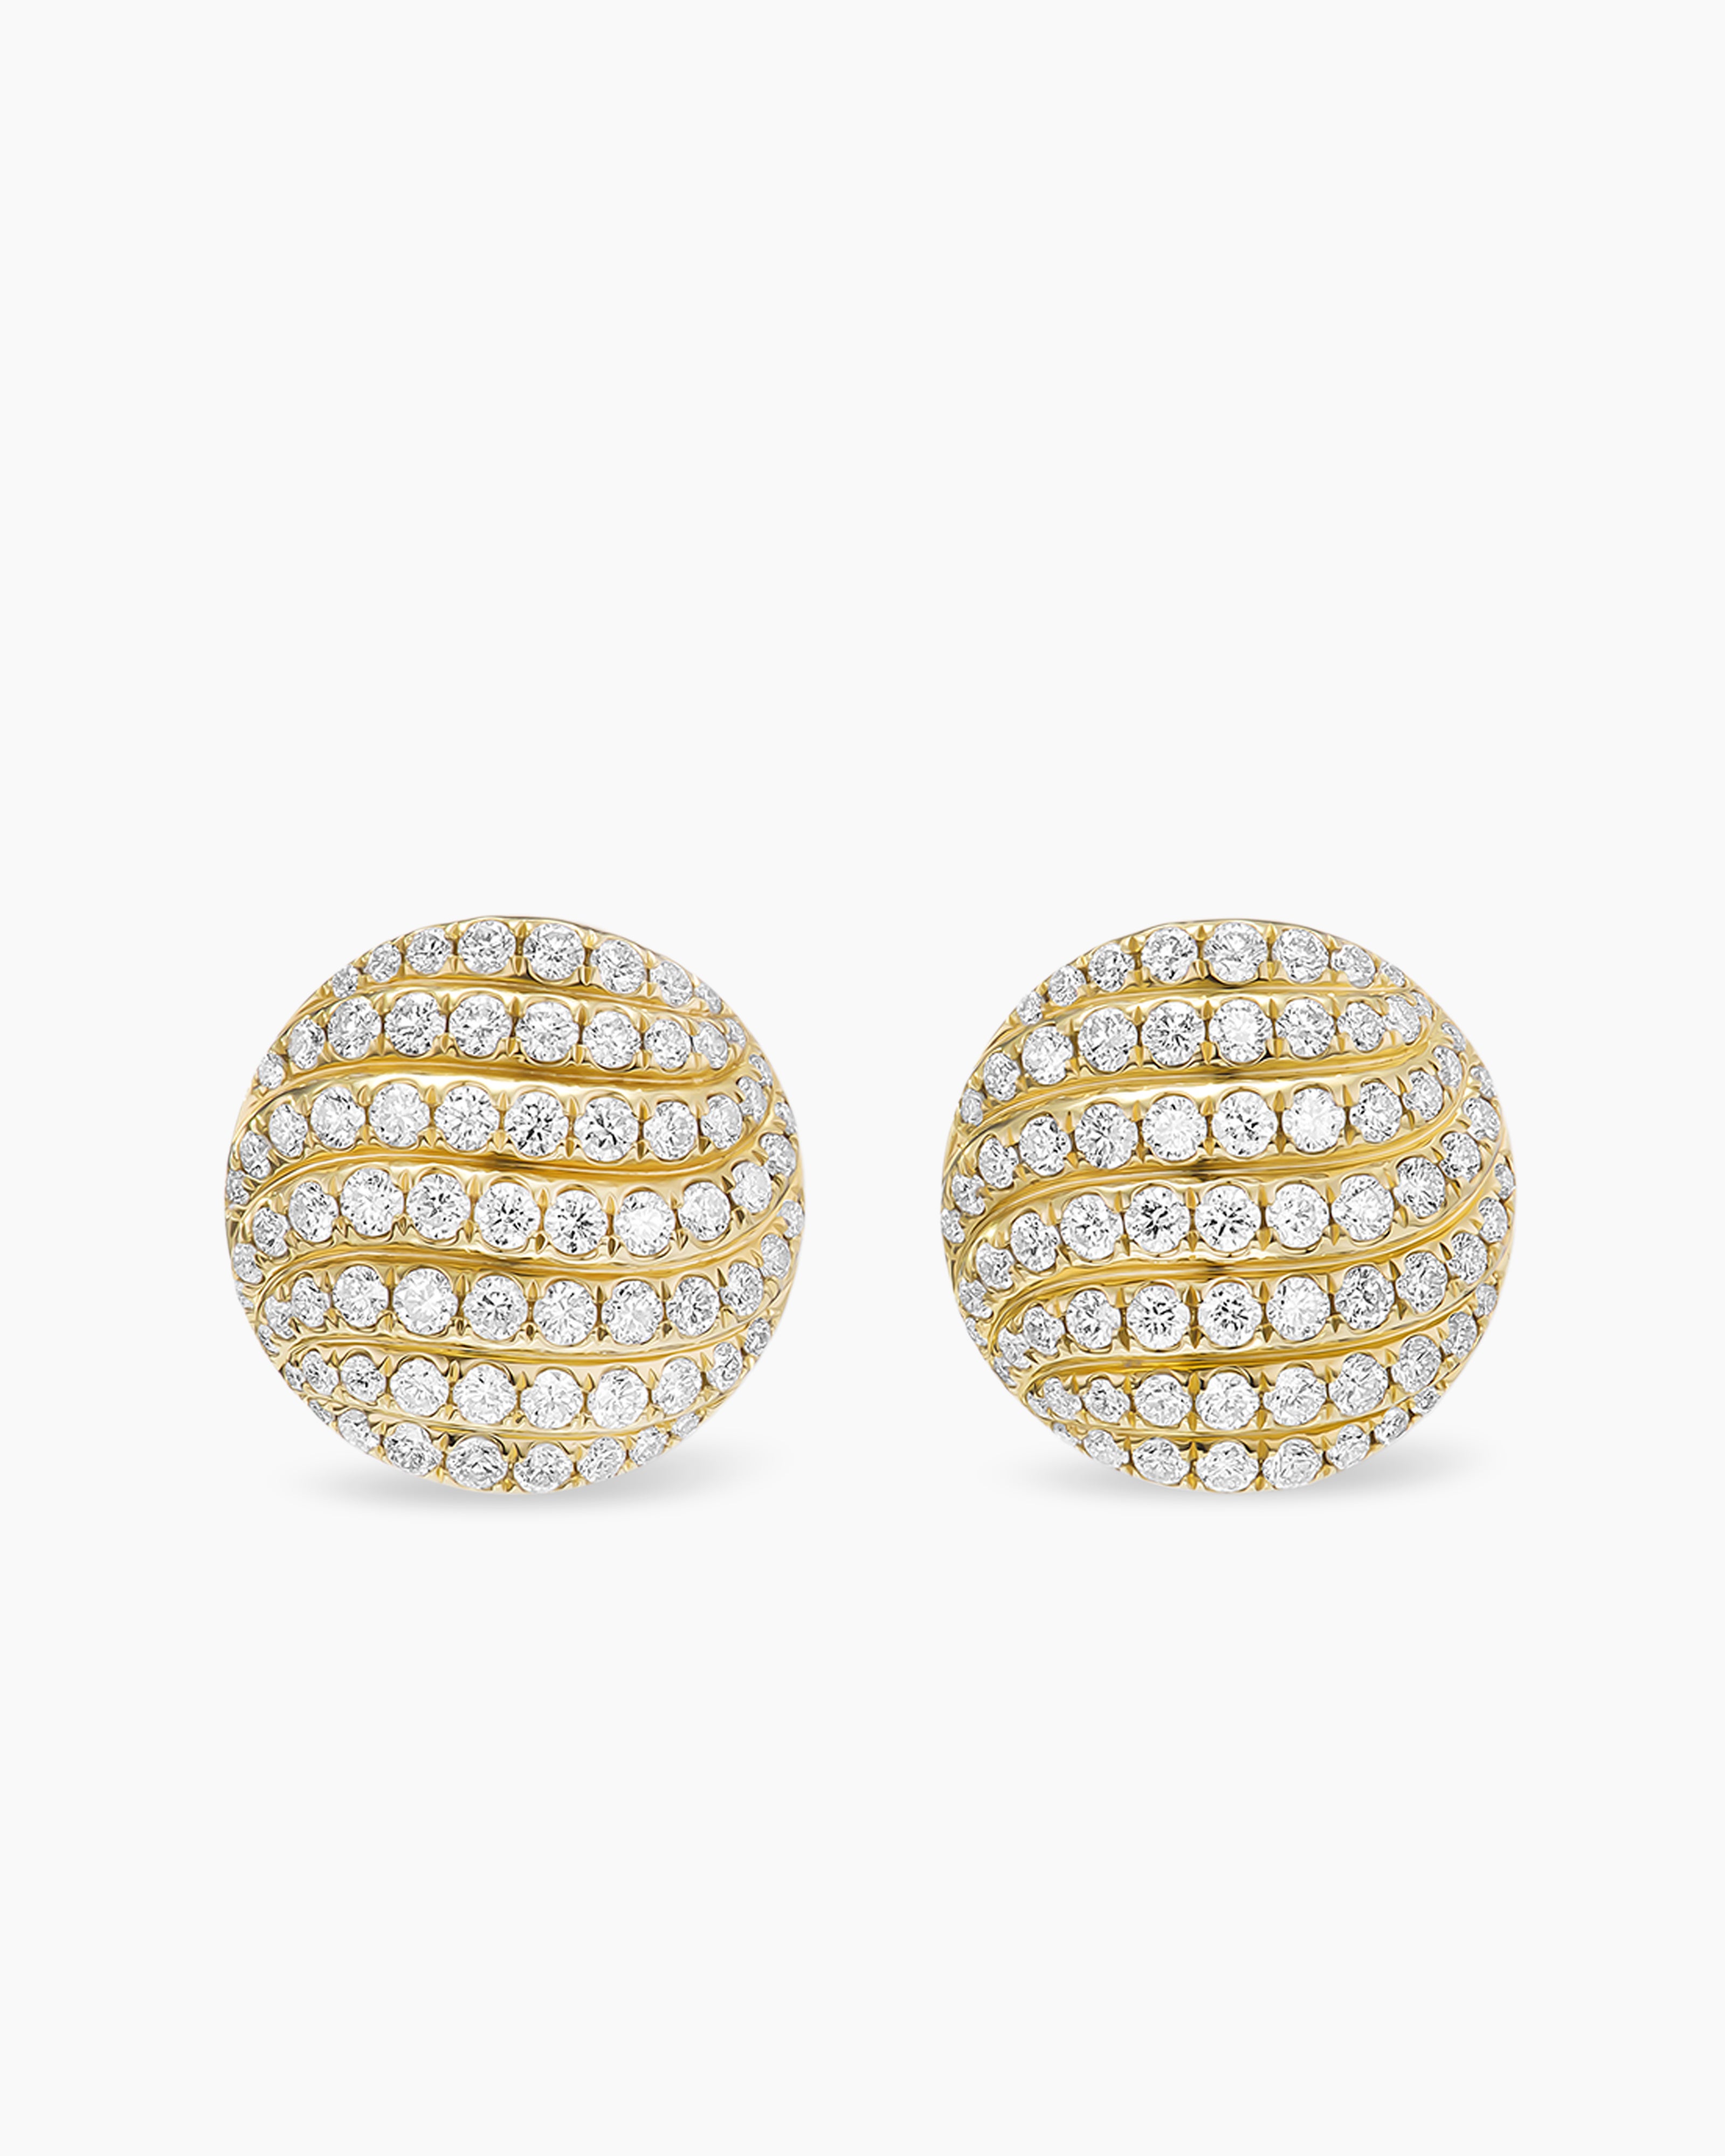 Sculpted Cable Stud Earrings in 18K Yellow Gold with Diamonds